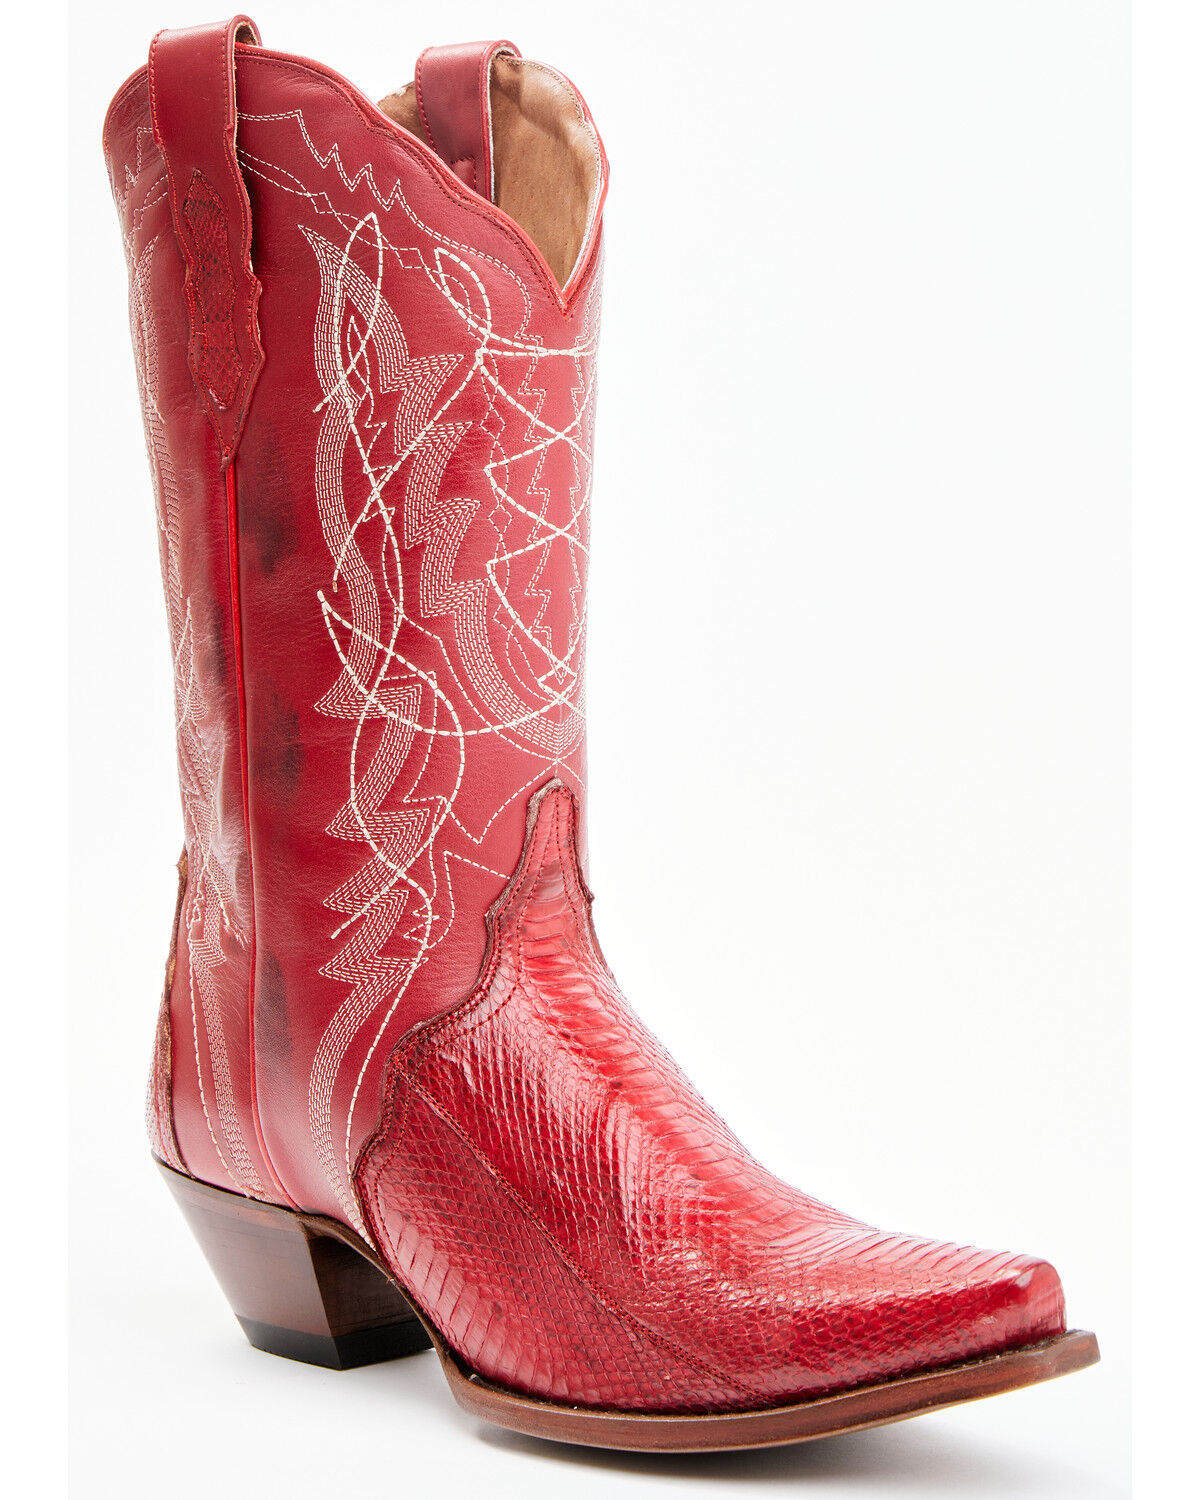 Women's New Leather Cowgirl Western Biker Boots Snip Toe Red Sale 